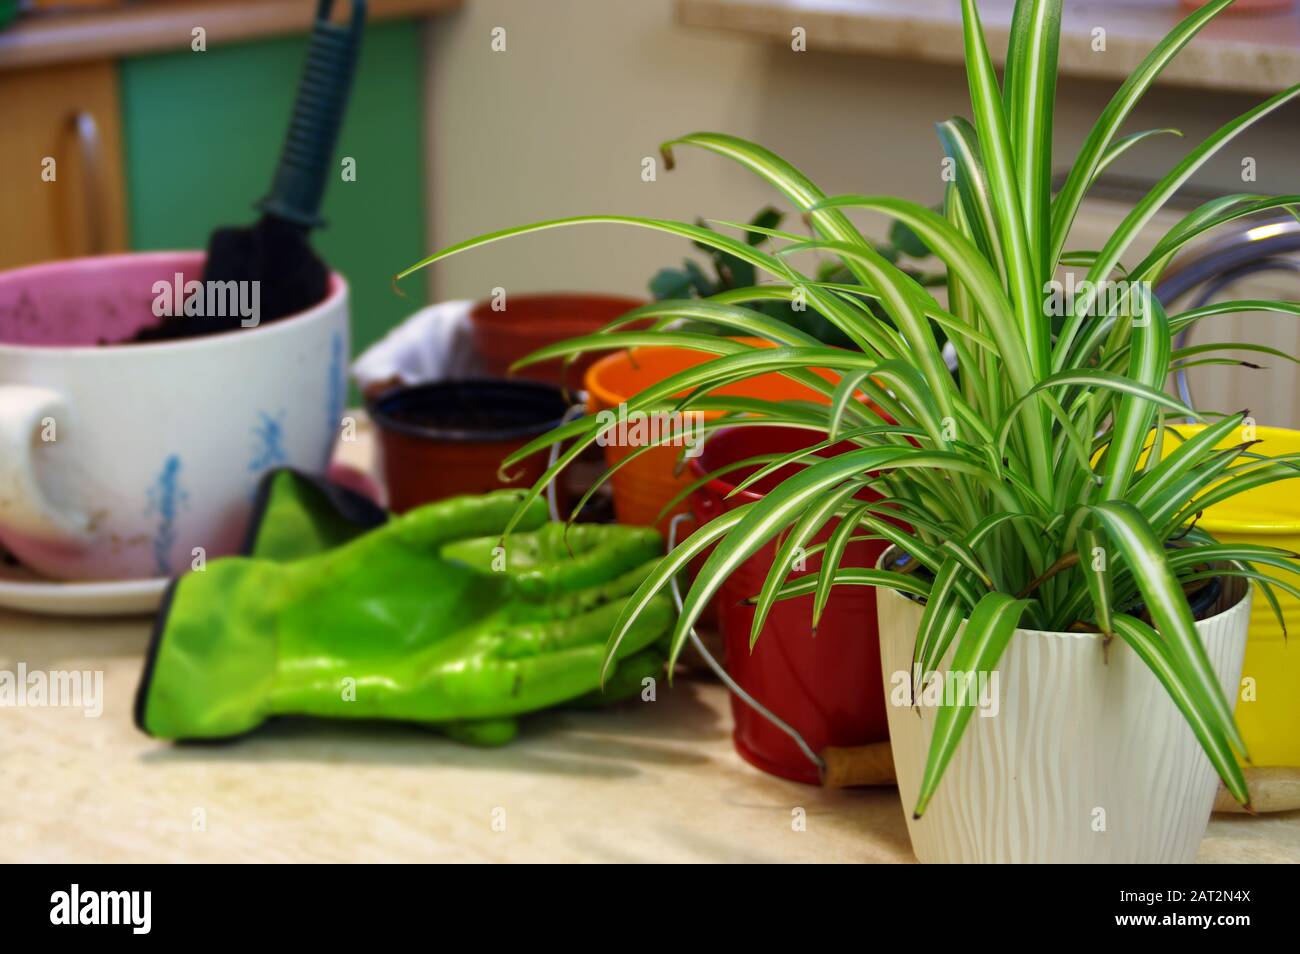 Home gardening. Planting potted plants. Tools, gloves and flowers on the table. Stock Photo